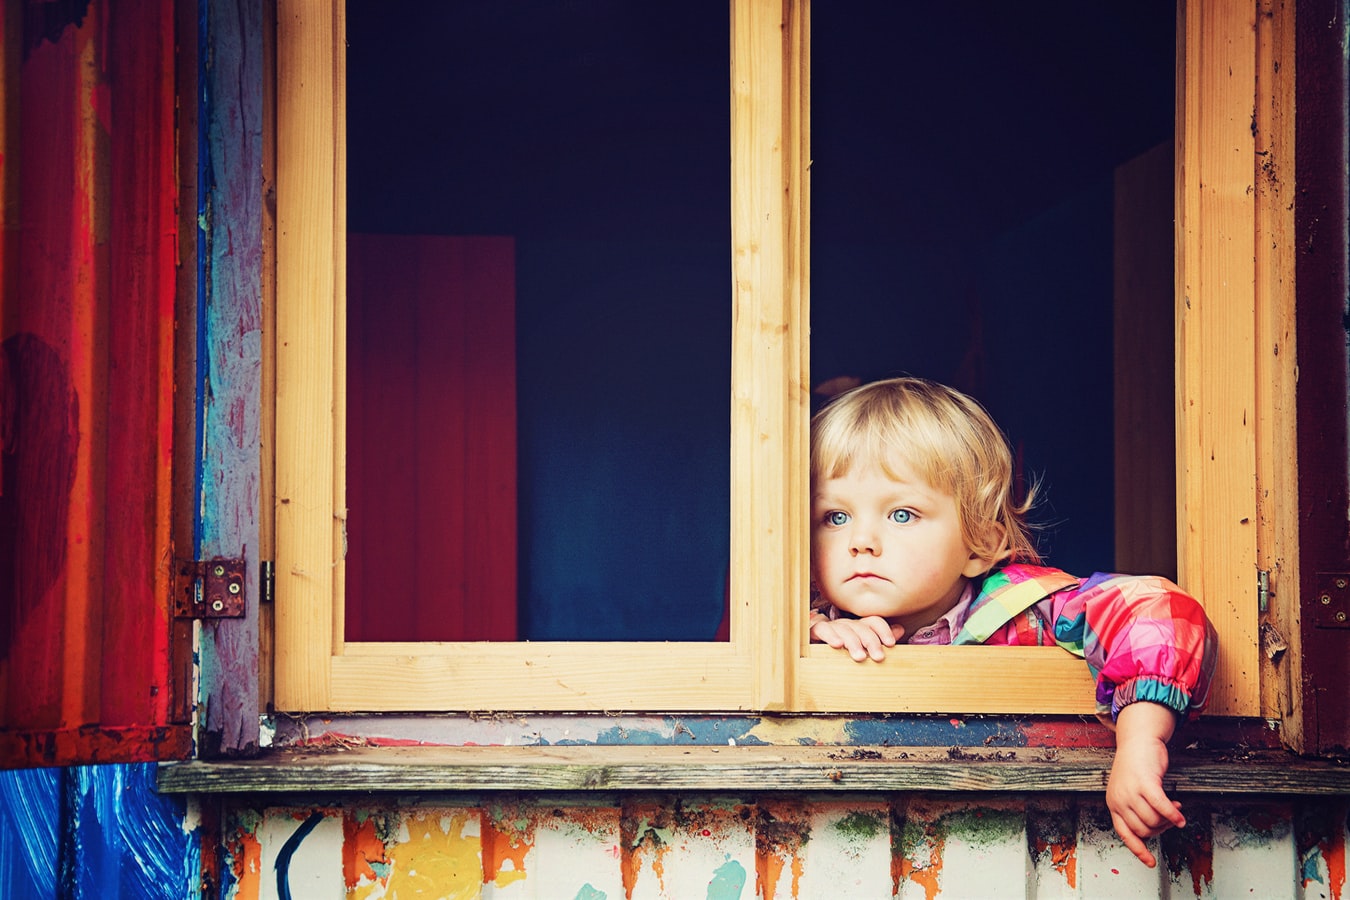 A young child looking out a window